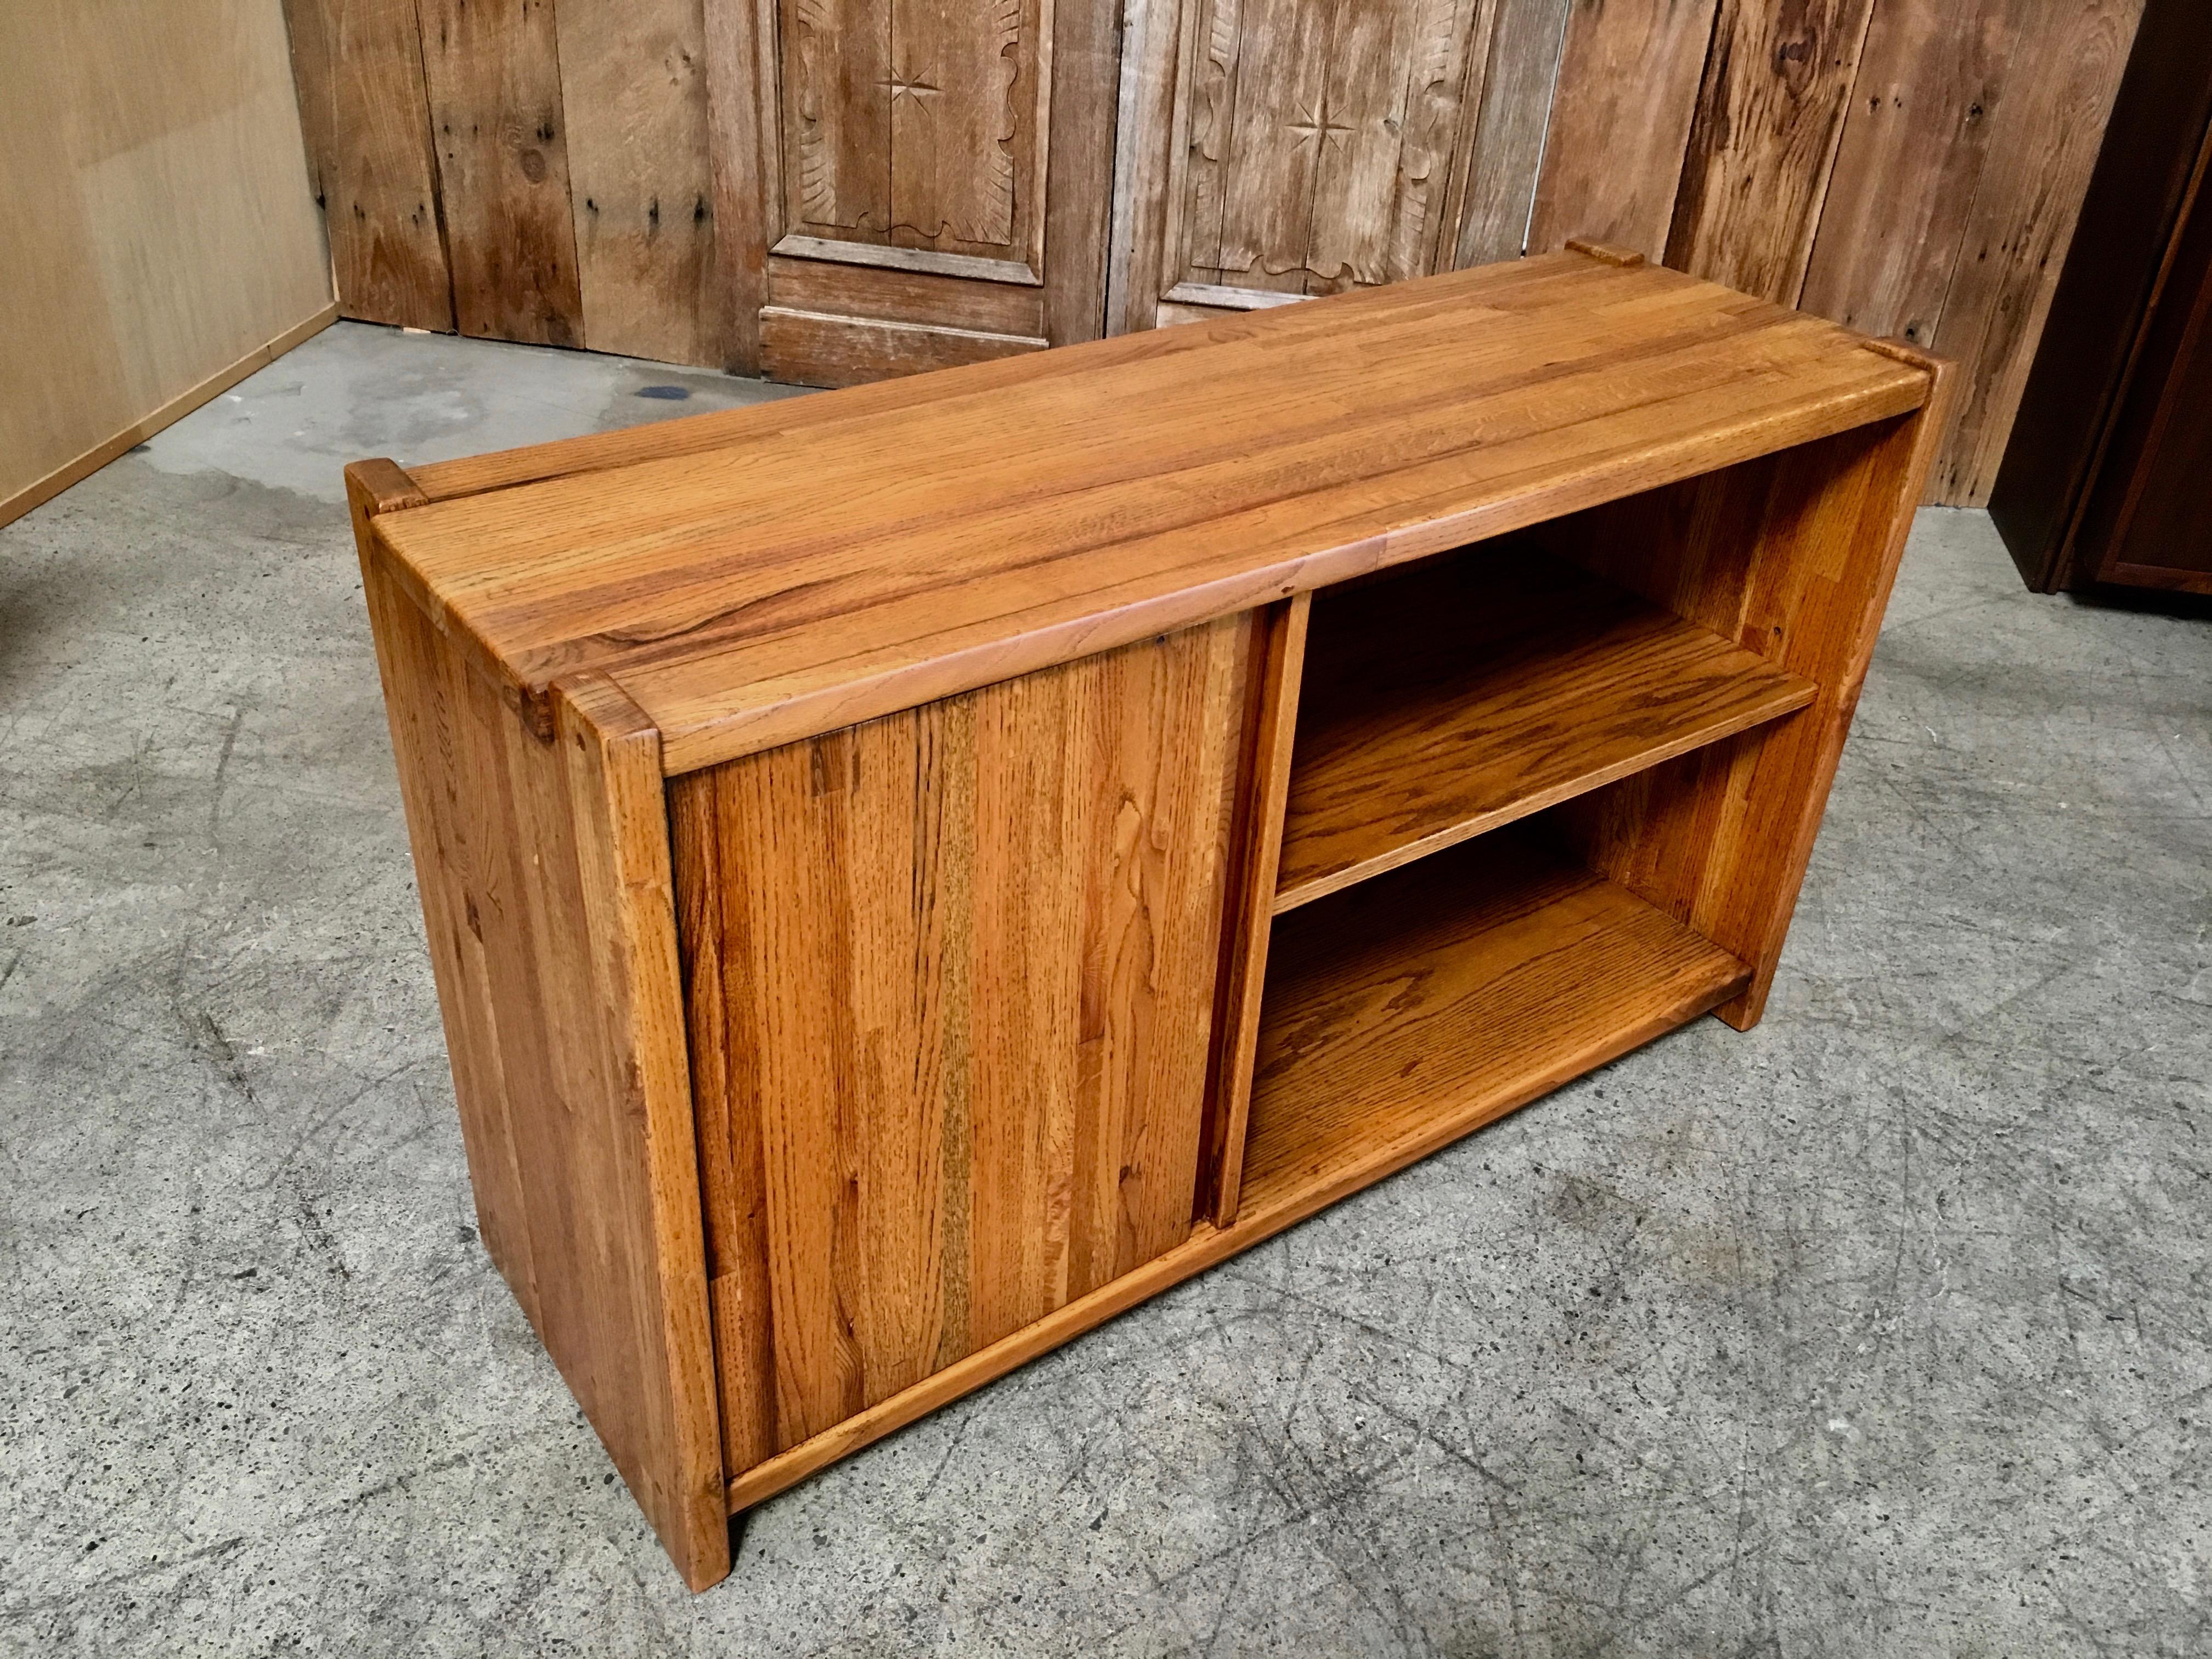 Solid oak butcher block construction with exposed dowels and walnut accent
This piece can be used for a entry way or media console
In the style of Lou Hodges.